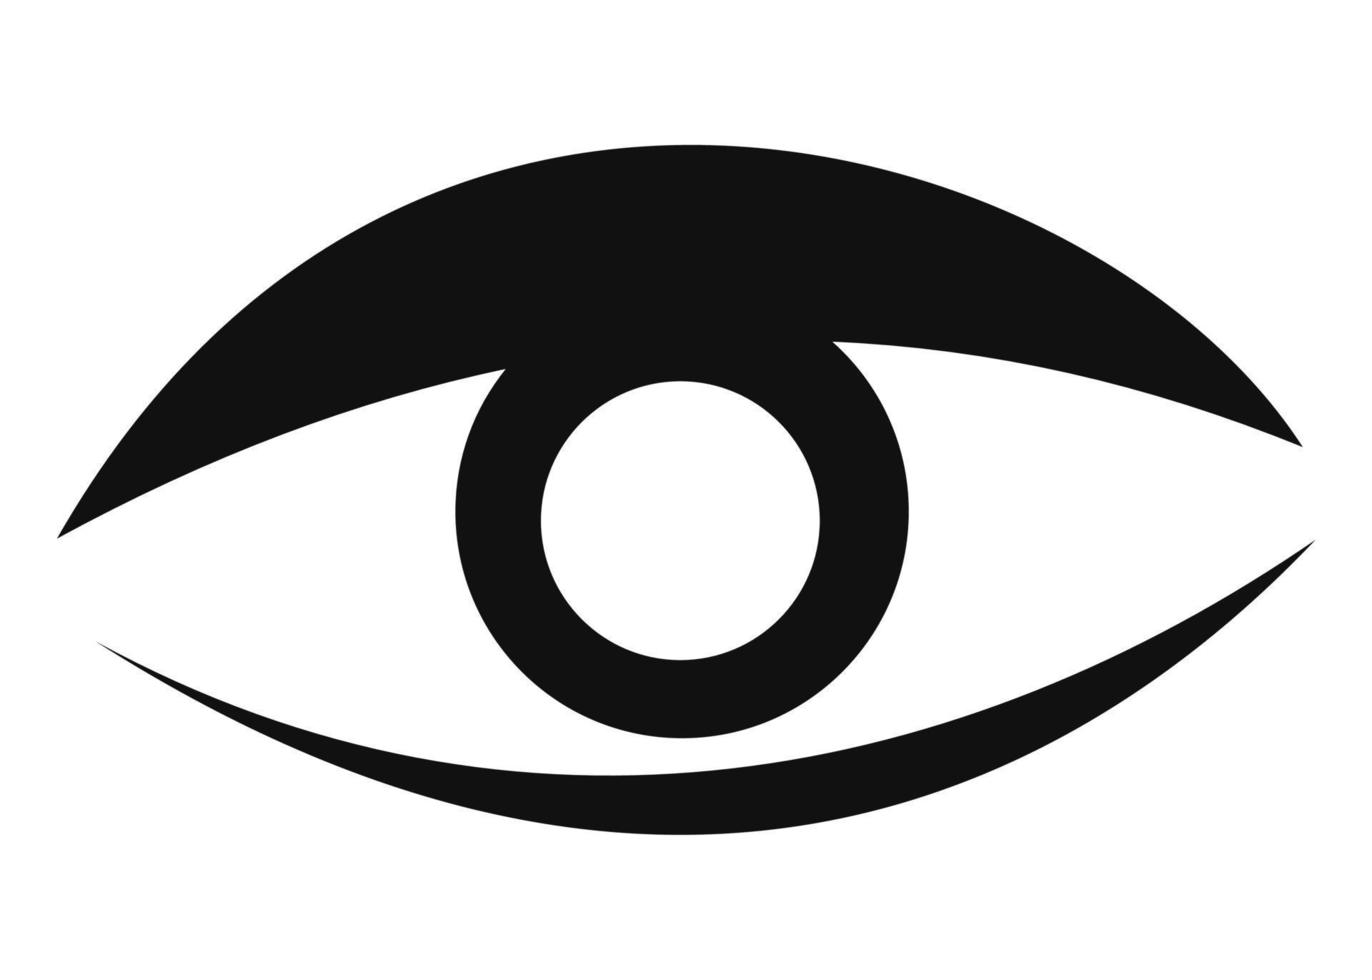 Eye icon on a white background. Vector illustration.